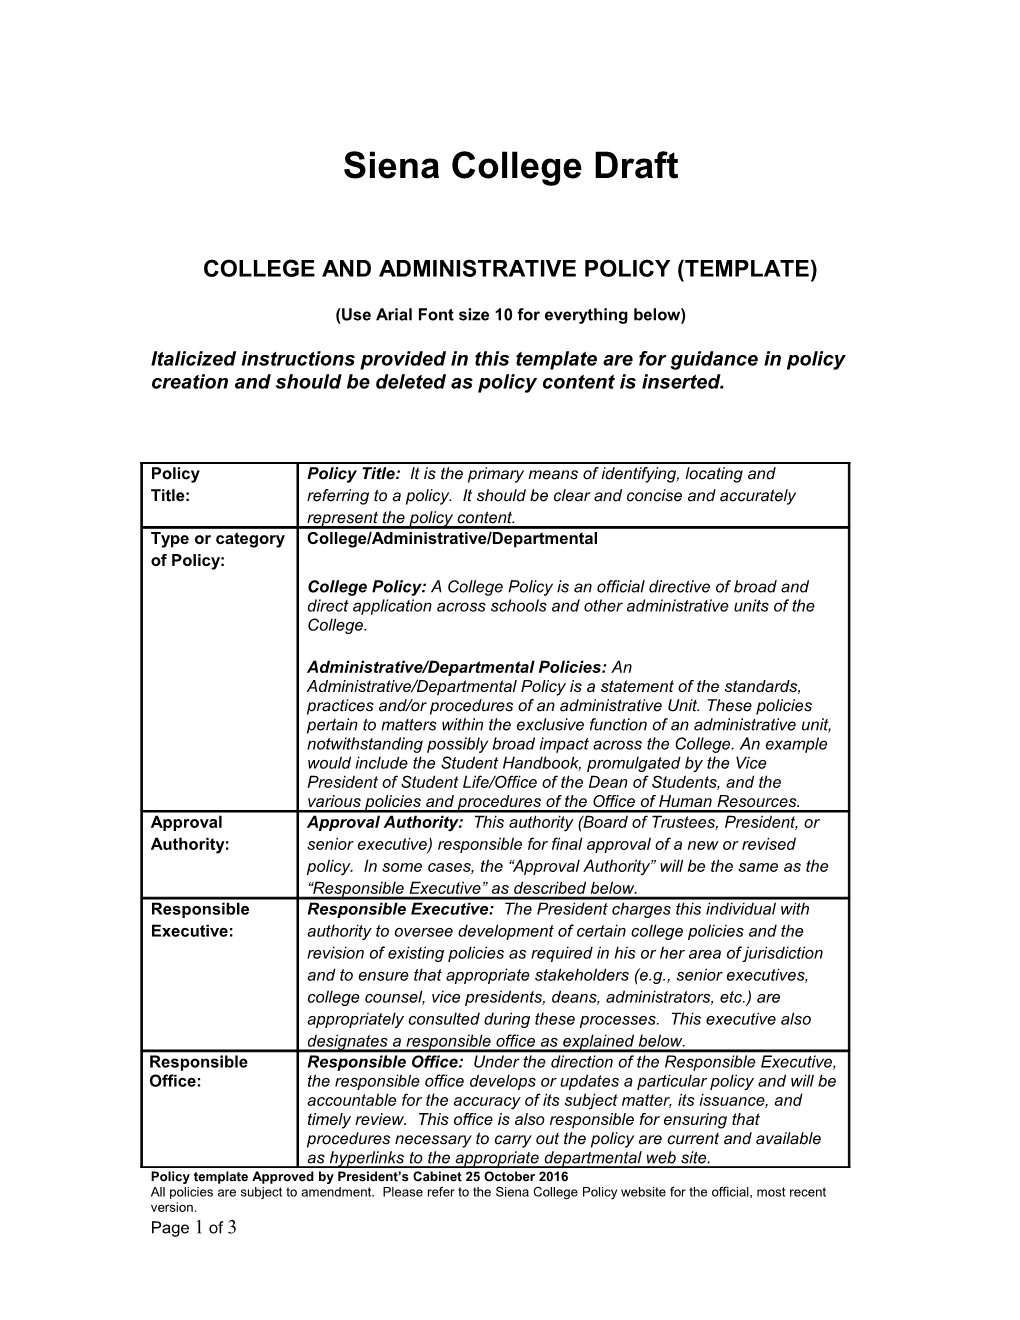 College and Administrative Policy (Template)